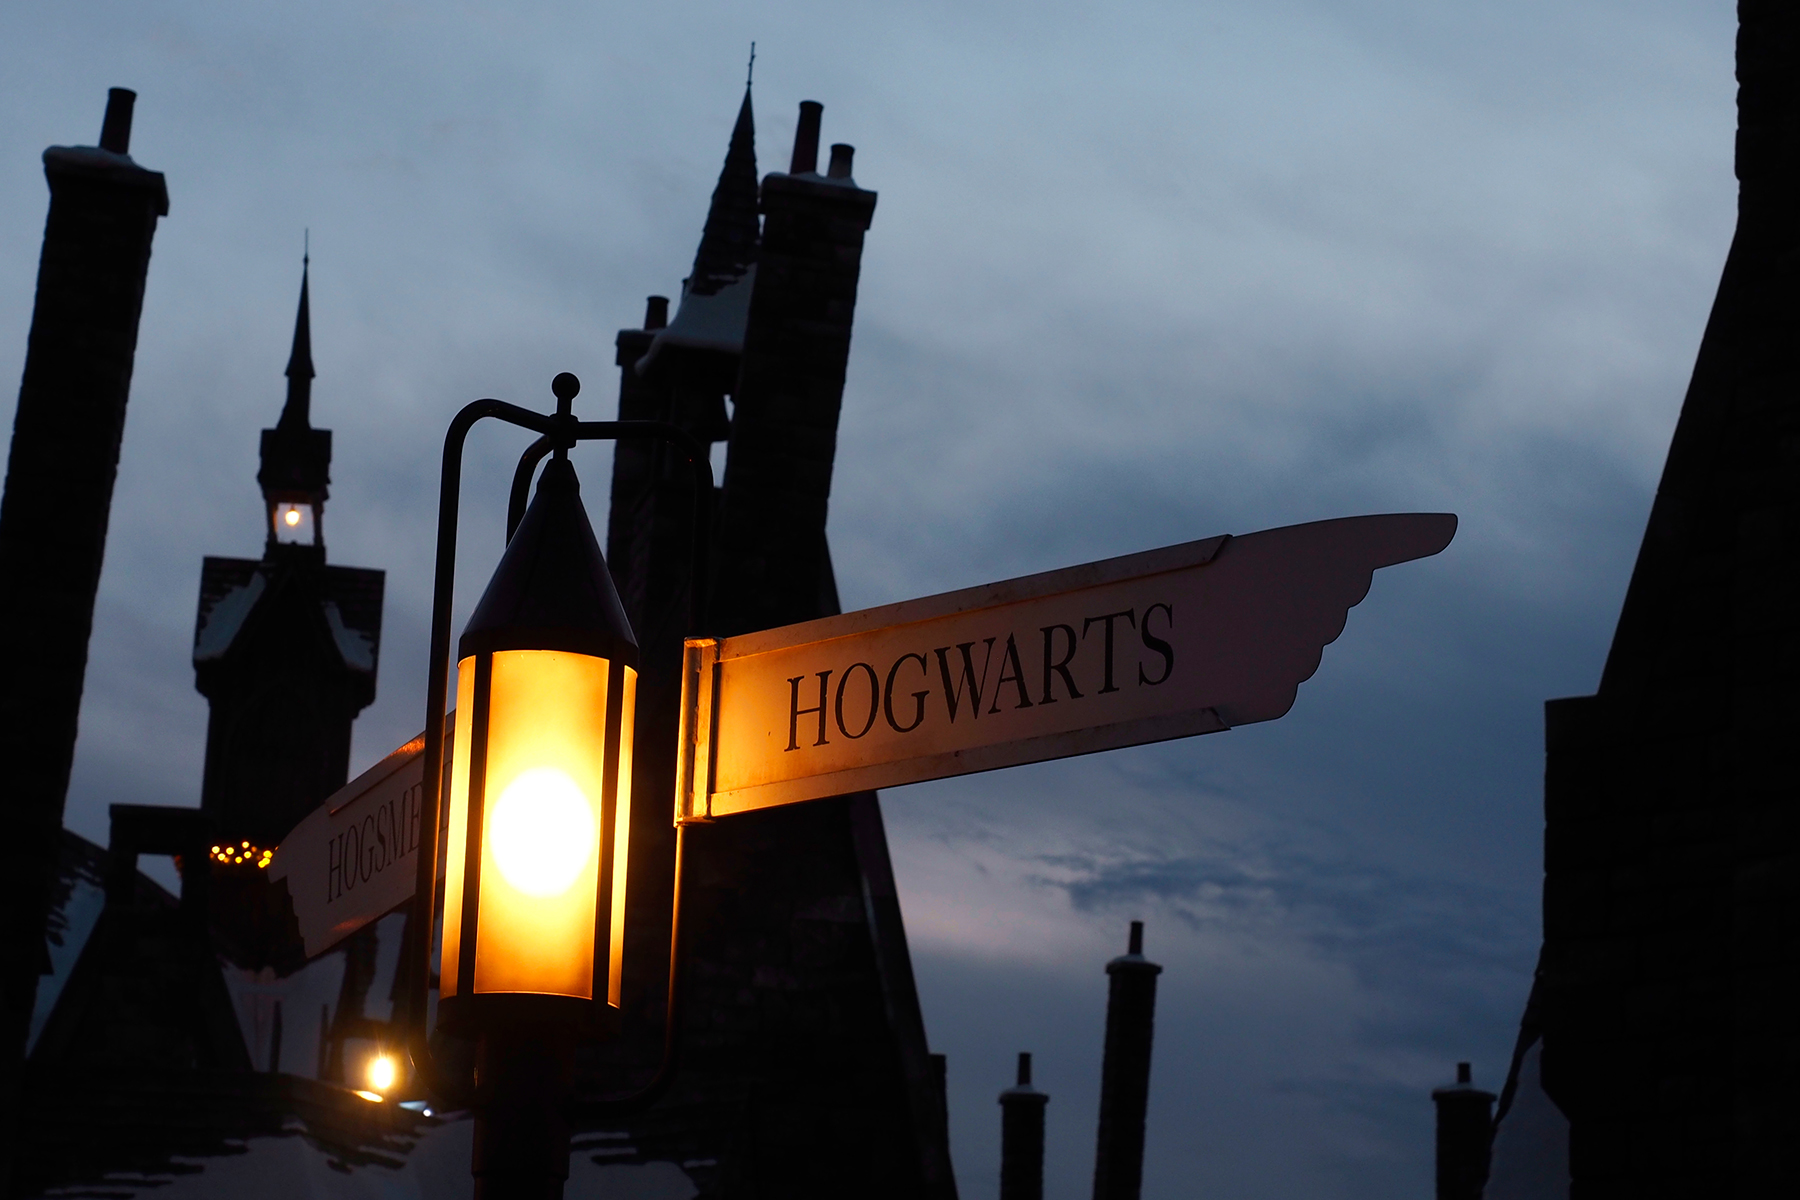 A photo of some buildings in silhouette against a dusky blue sky with a sign saying 'Hogwarts' next to a lamp